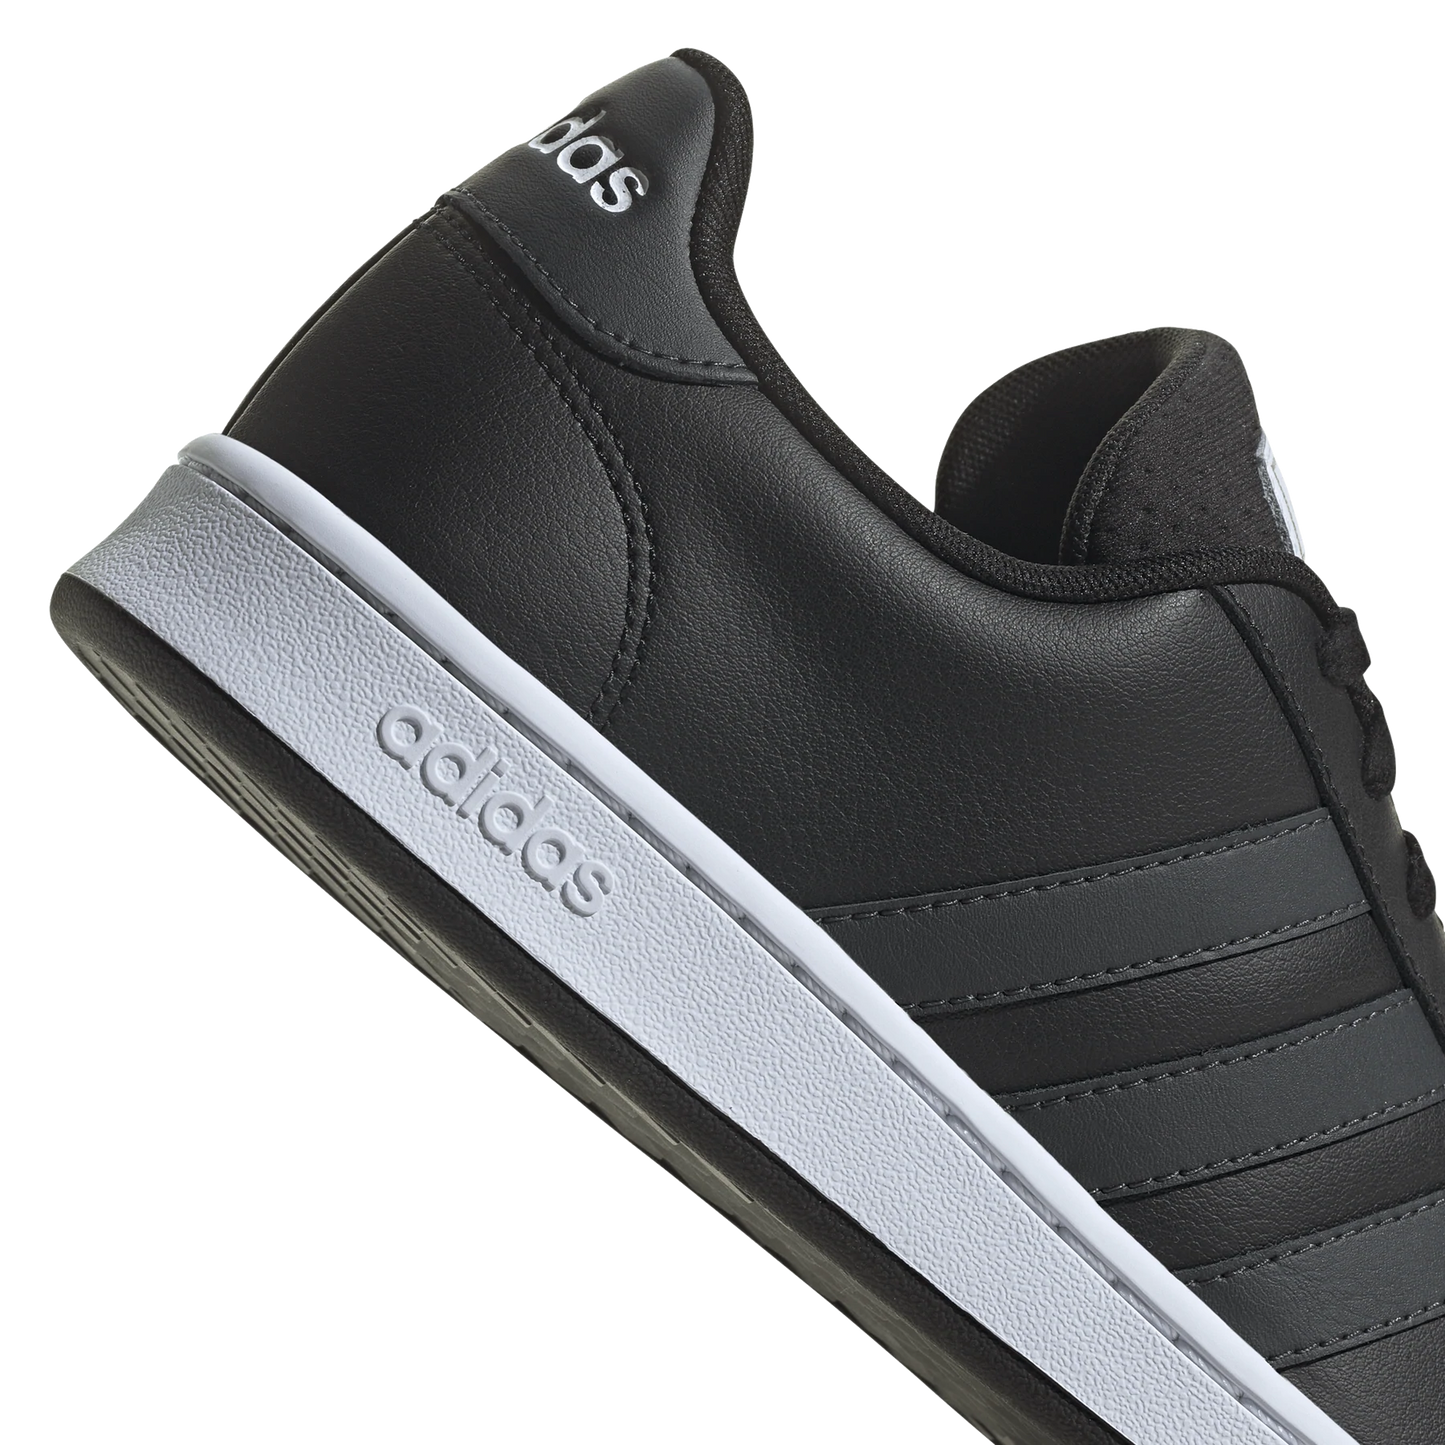 Adidas Unisex Grand Court Black / Carbon / MaGold (GY3623) - GY - R2L13